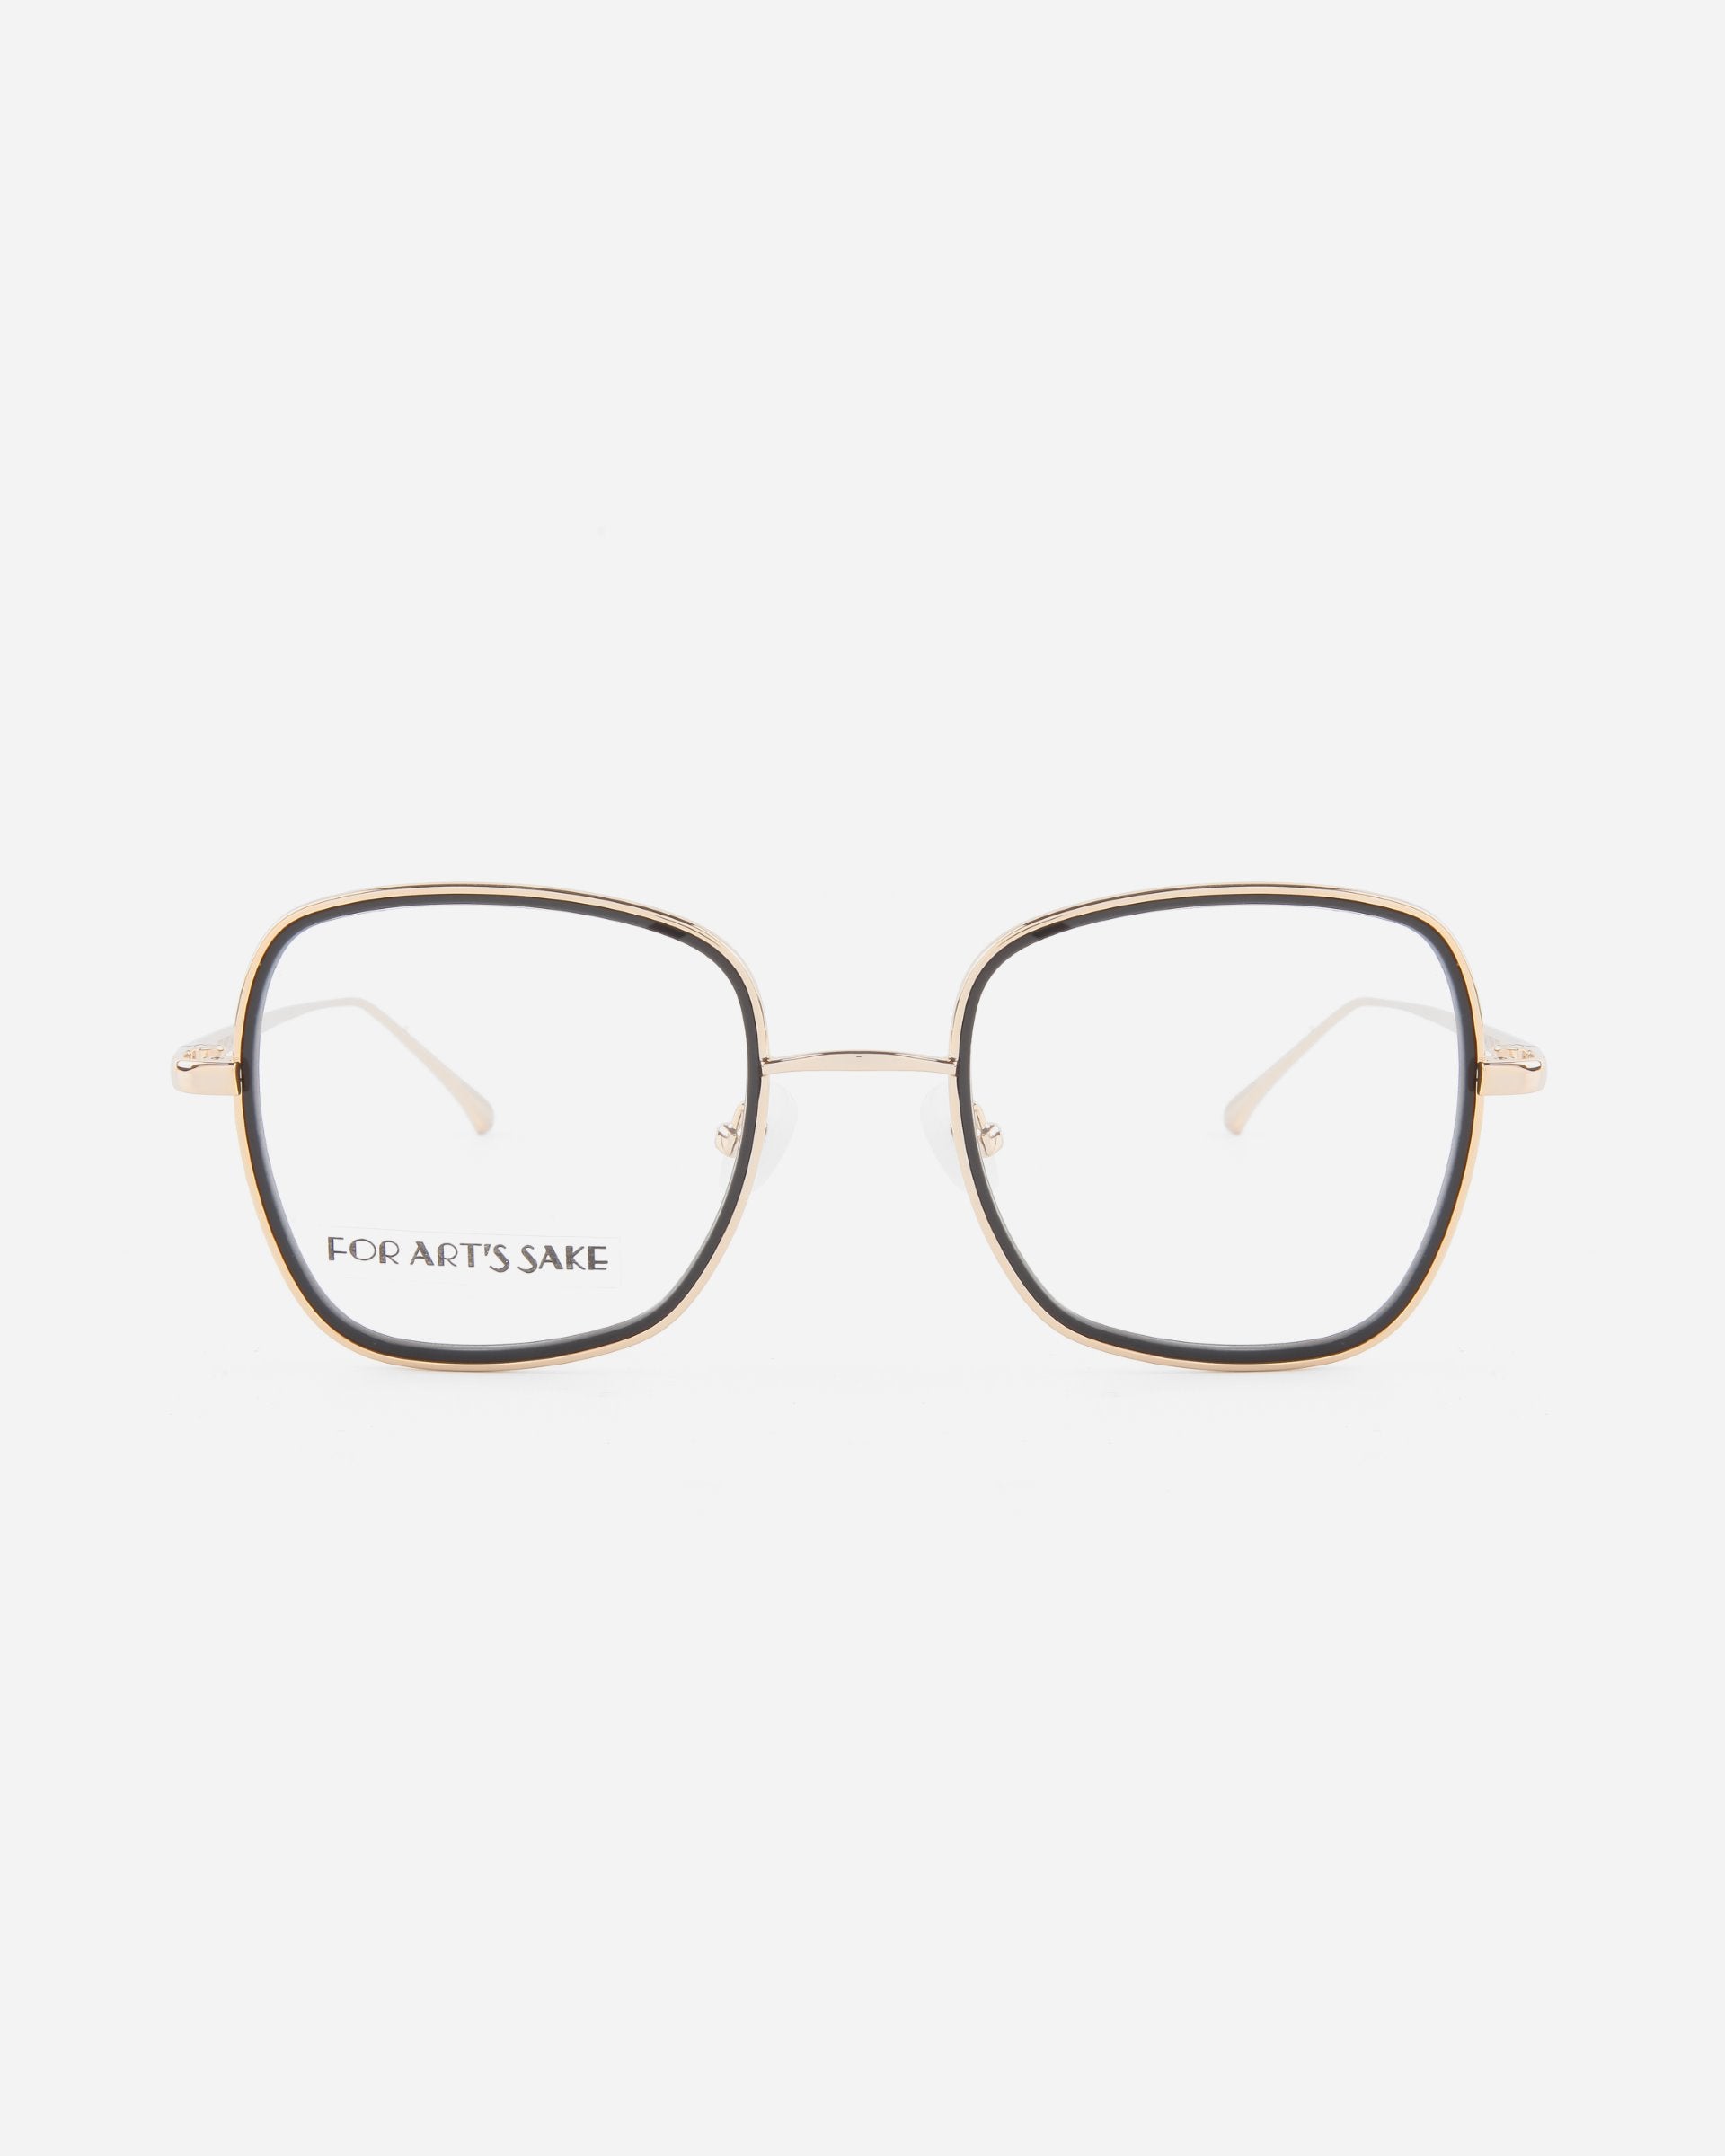 A pair of square-shaped, thin-framed eyeglasses with a gold metal frame and clear ultra-lightweight lenses. The brand name "For Art's Sake®" is printed on the inside of the left lens. The product name "Coconut" is associated with this stylish accessory. The background is plain white.